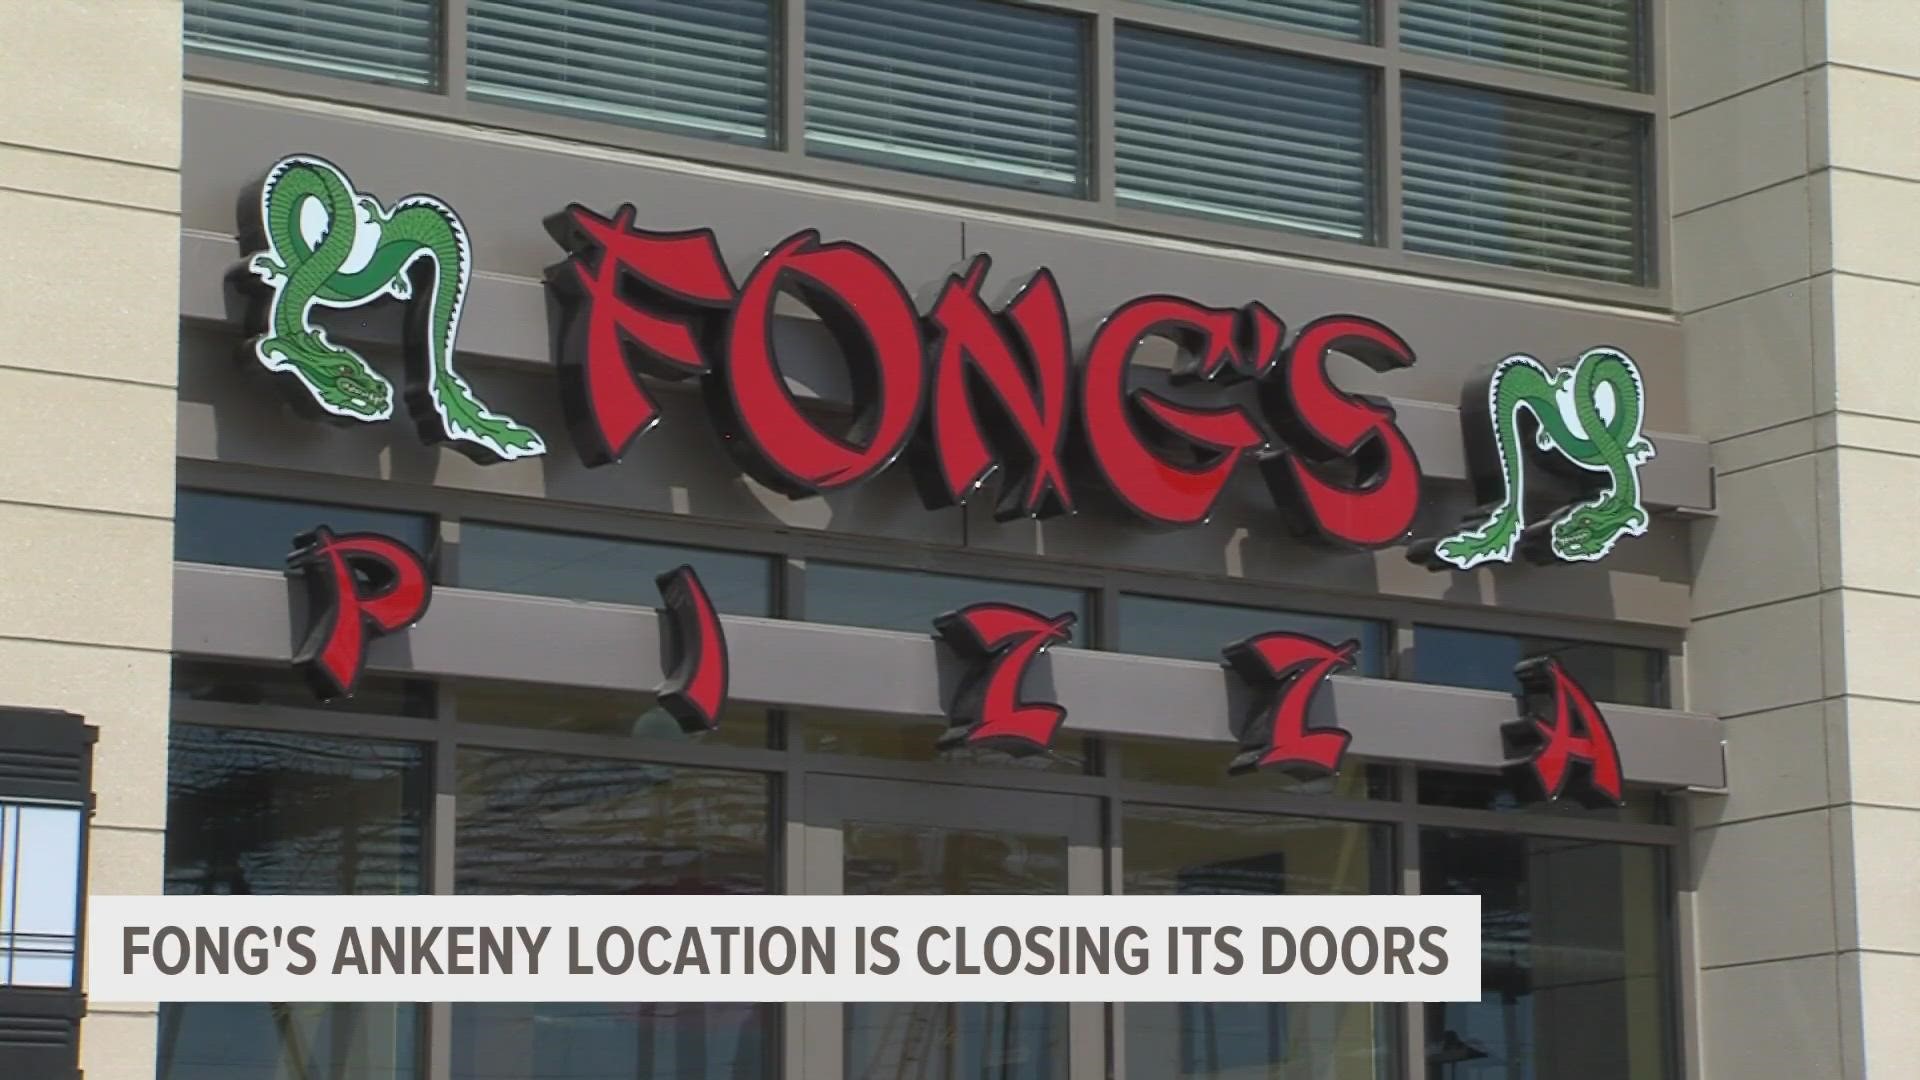 Fong's Pizza shared on Facebook that the chain's Ankeny location will shut its doors March 18.